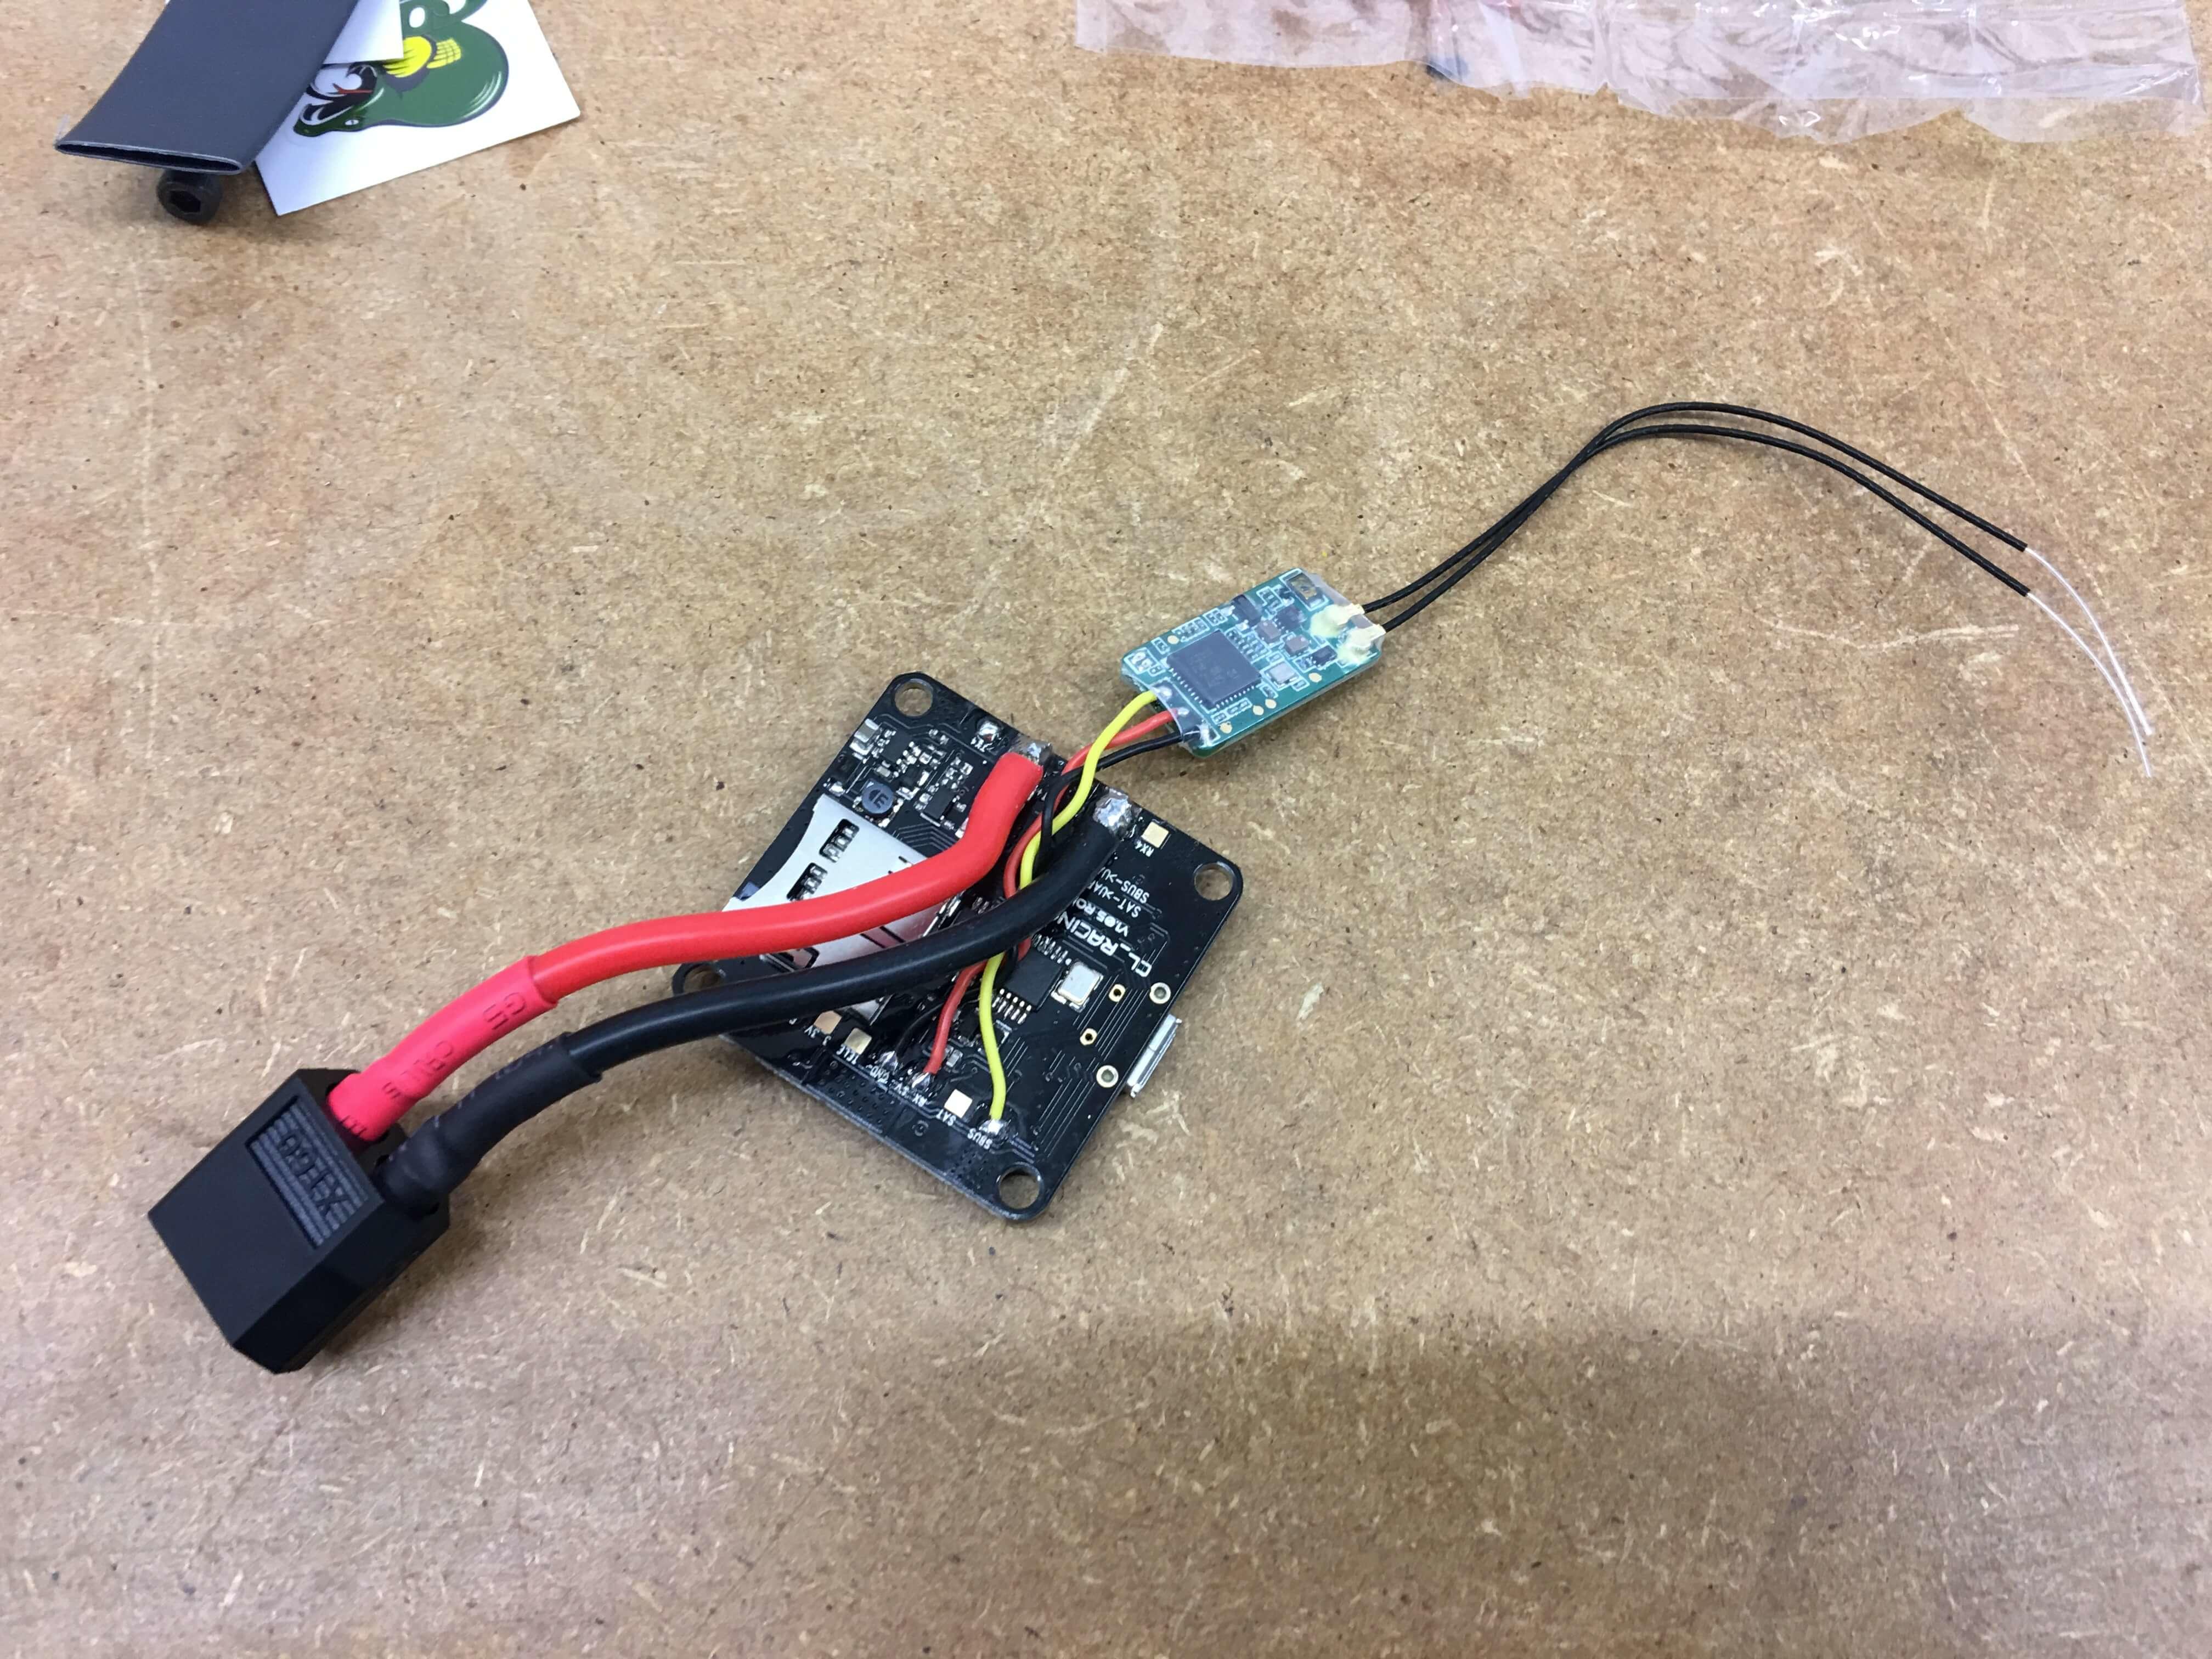 XM+ receiver soldered to the CL racing F4 flight controller